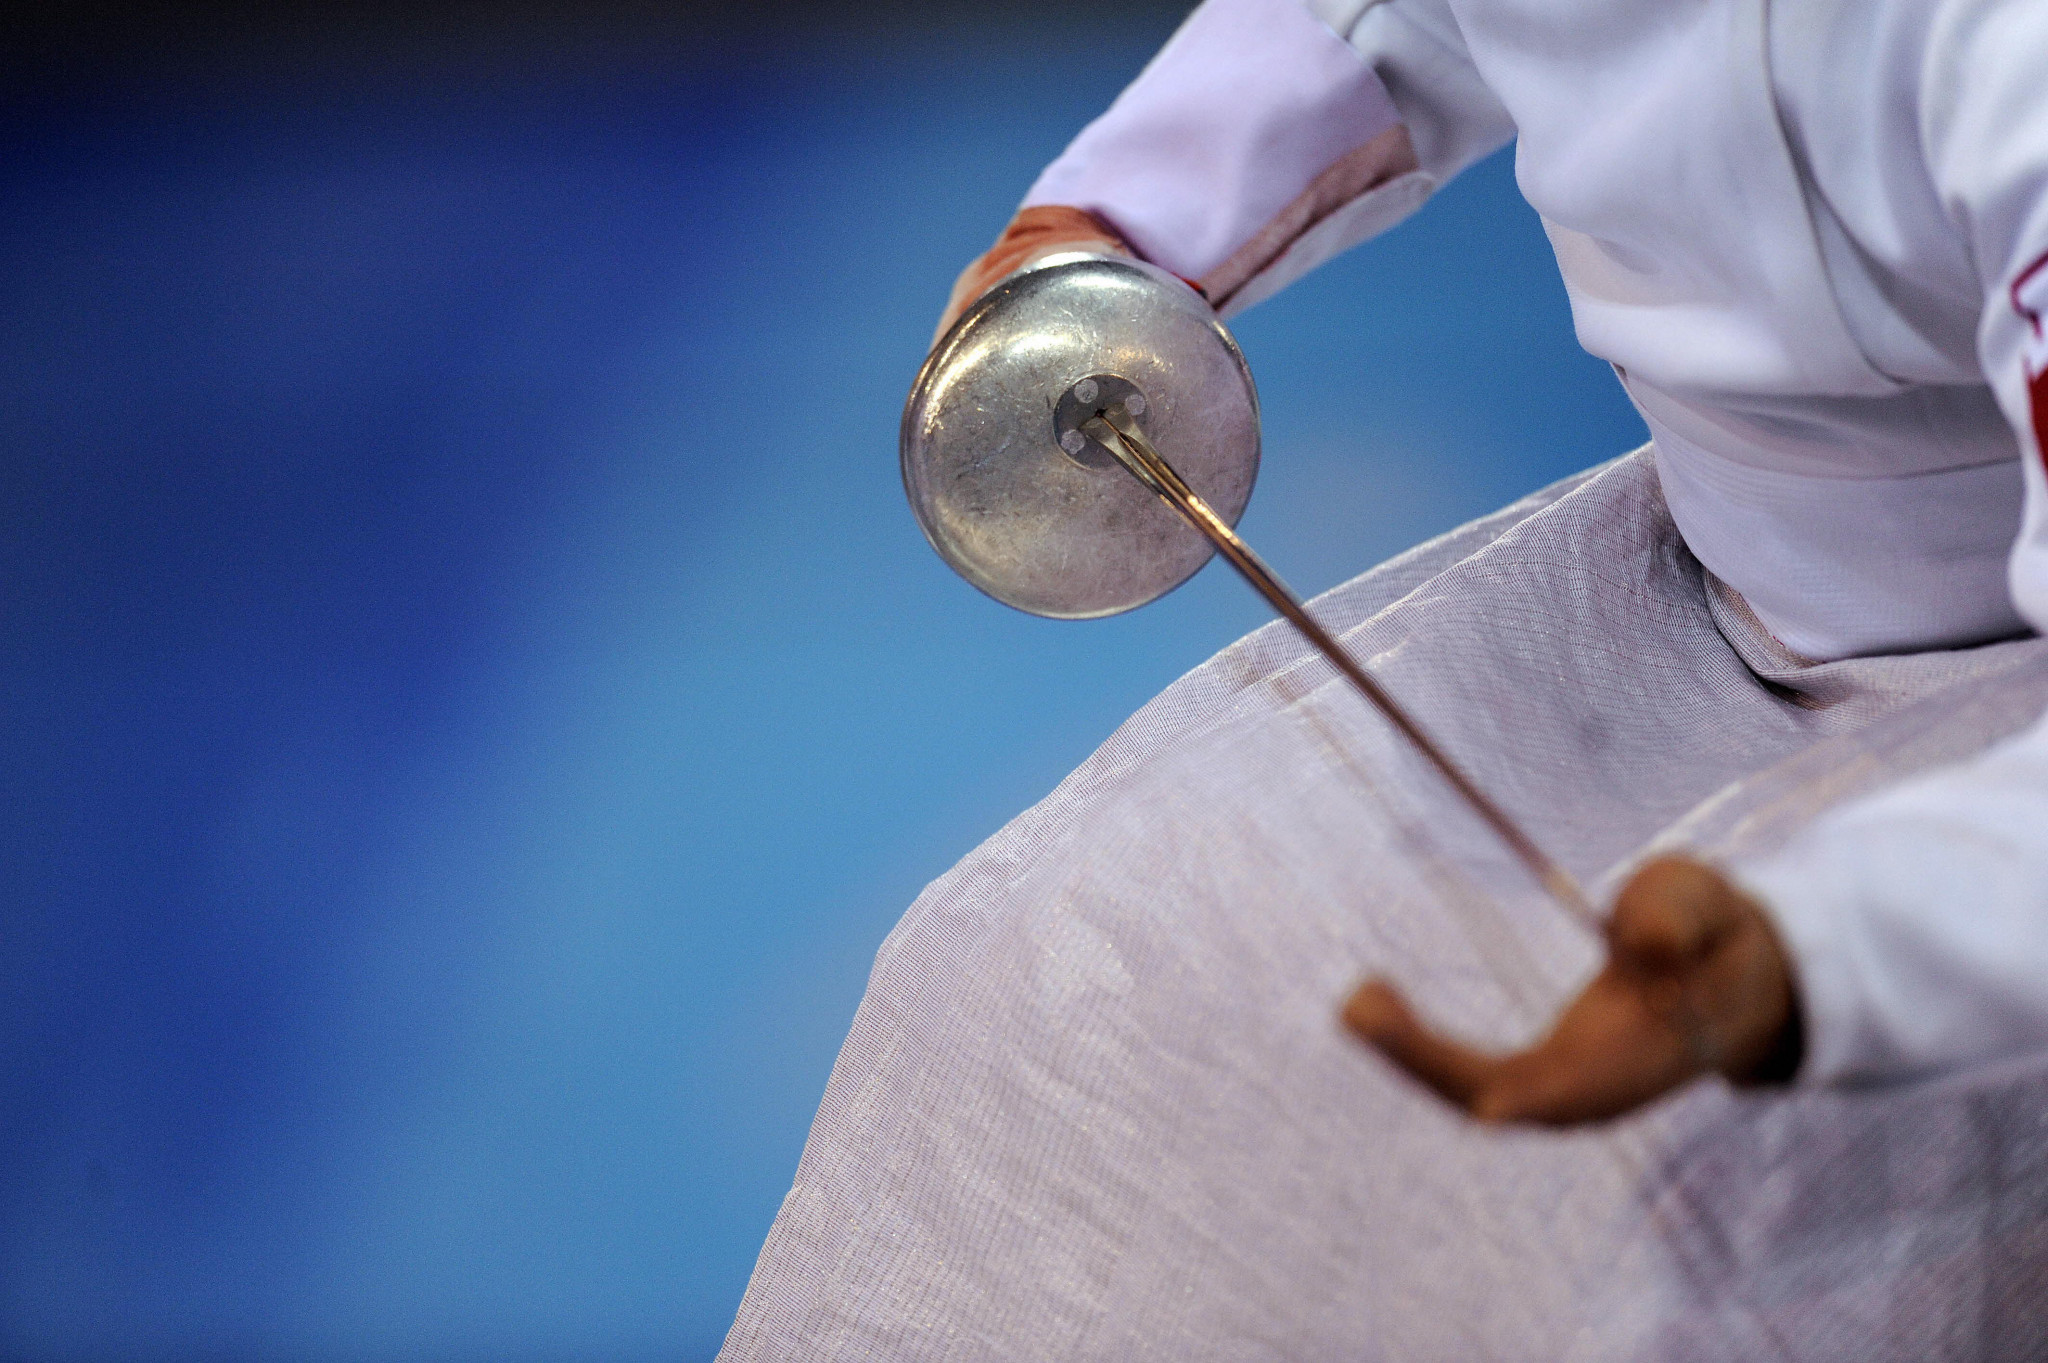 IWAS aims to widen participation with launch of Wheelchair Fencing Satellite World Cup